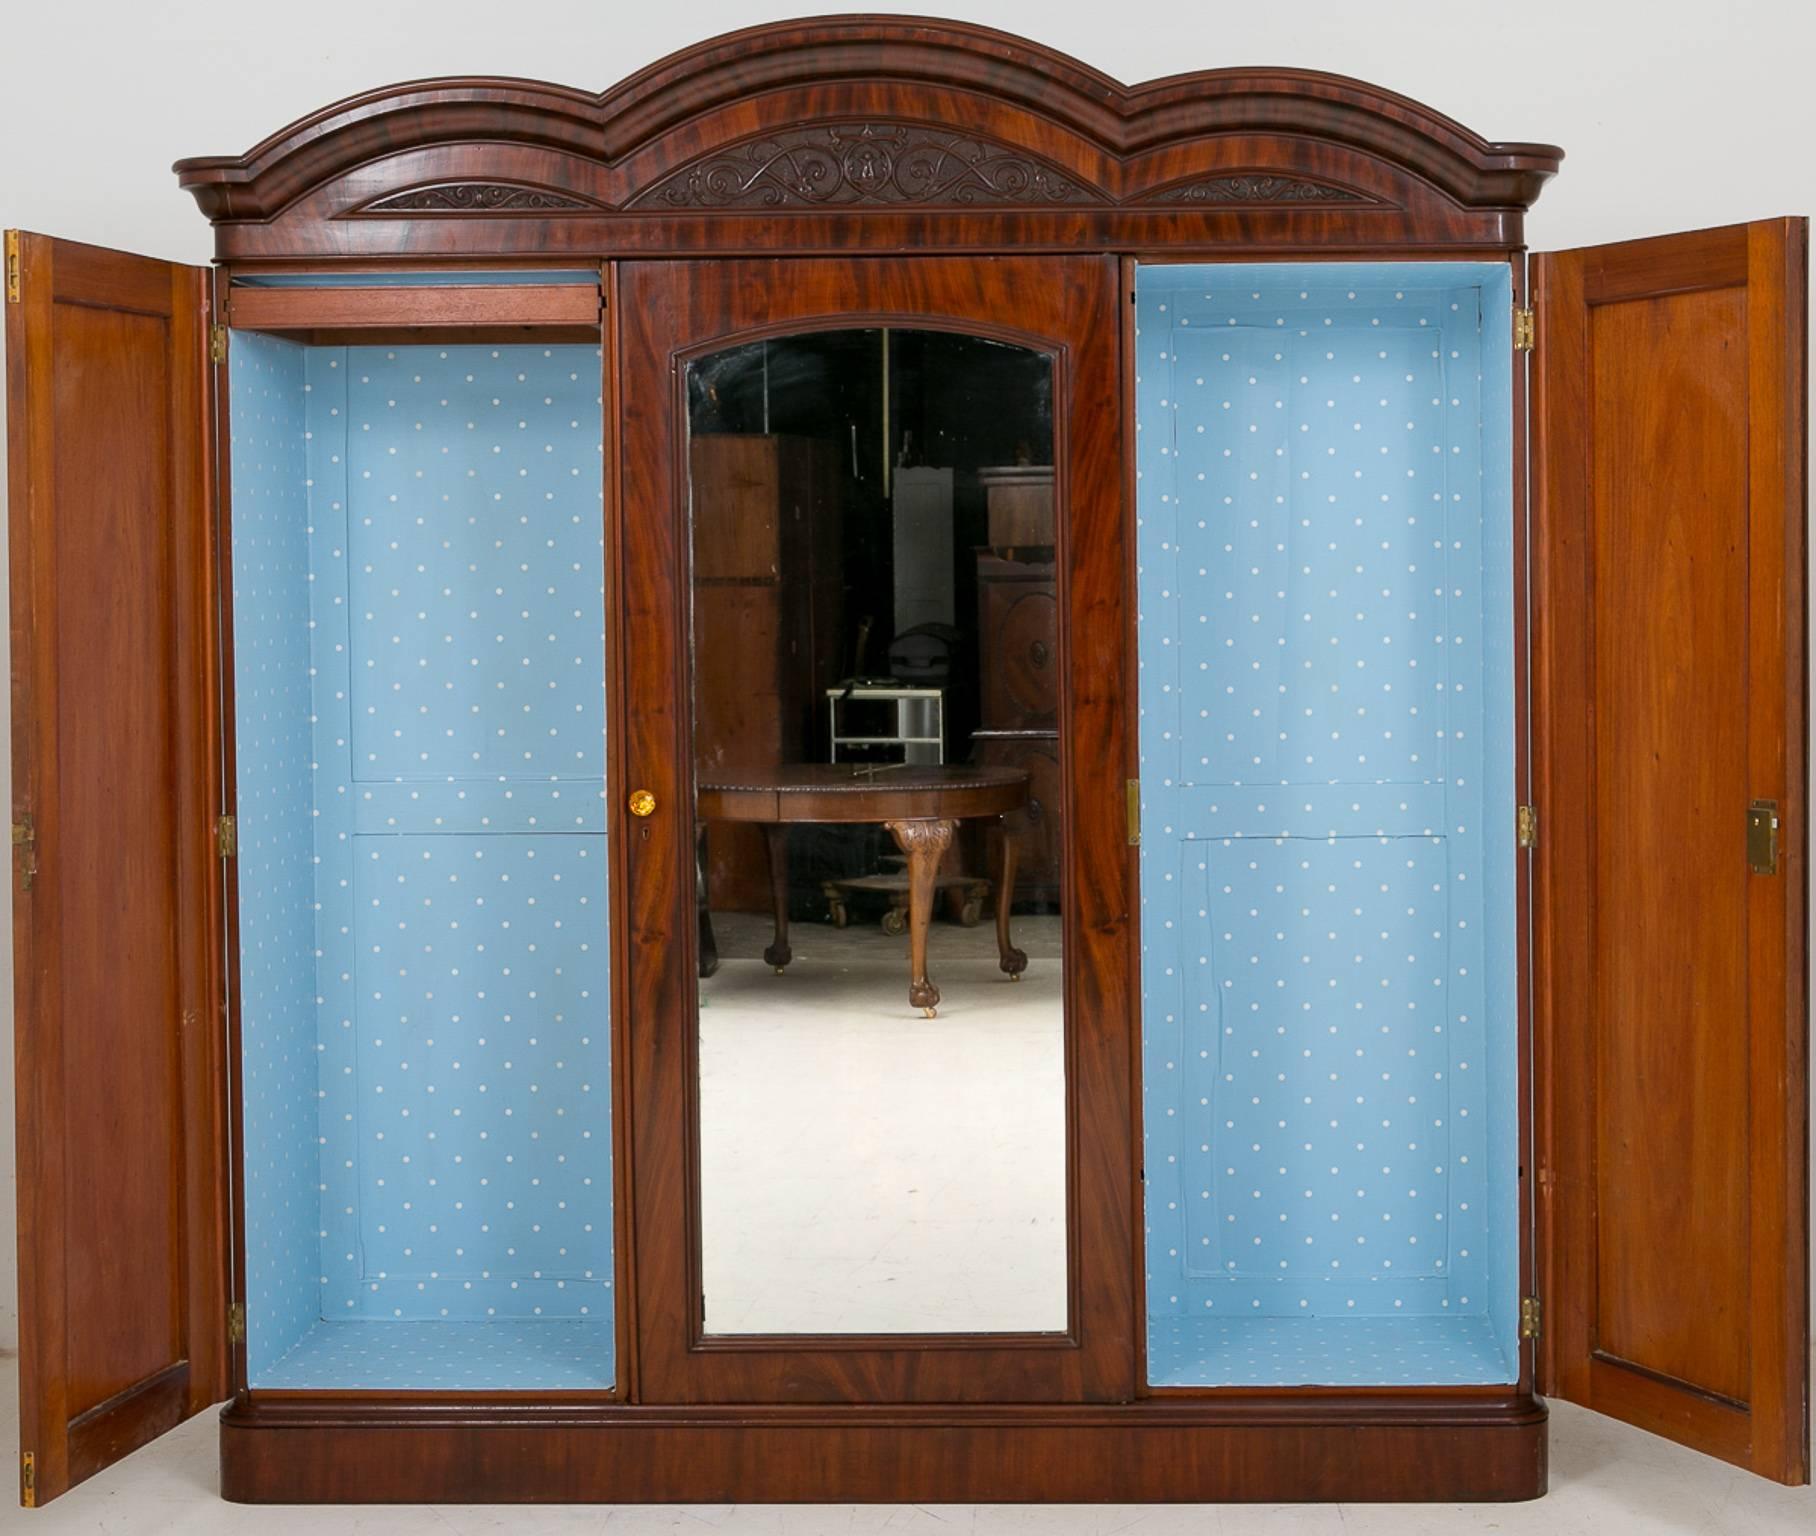 Mahogany three-door gentleman's wardrobe.
Featuring very highly flamed mahogany doors.
A lovely triple domed top with deeply carved inserts.
The left and right hand side for hanging and the centre section having mahogany drawers and mahogany